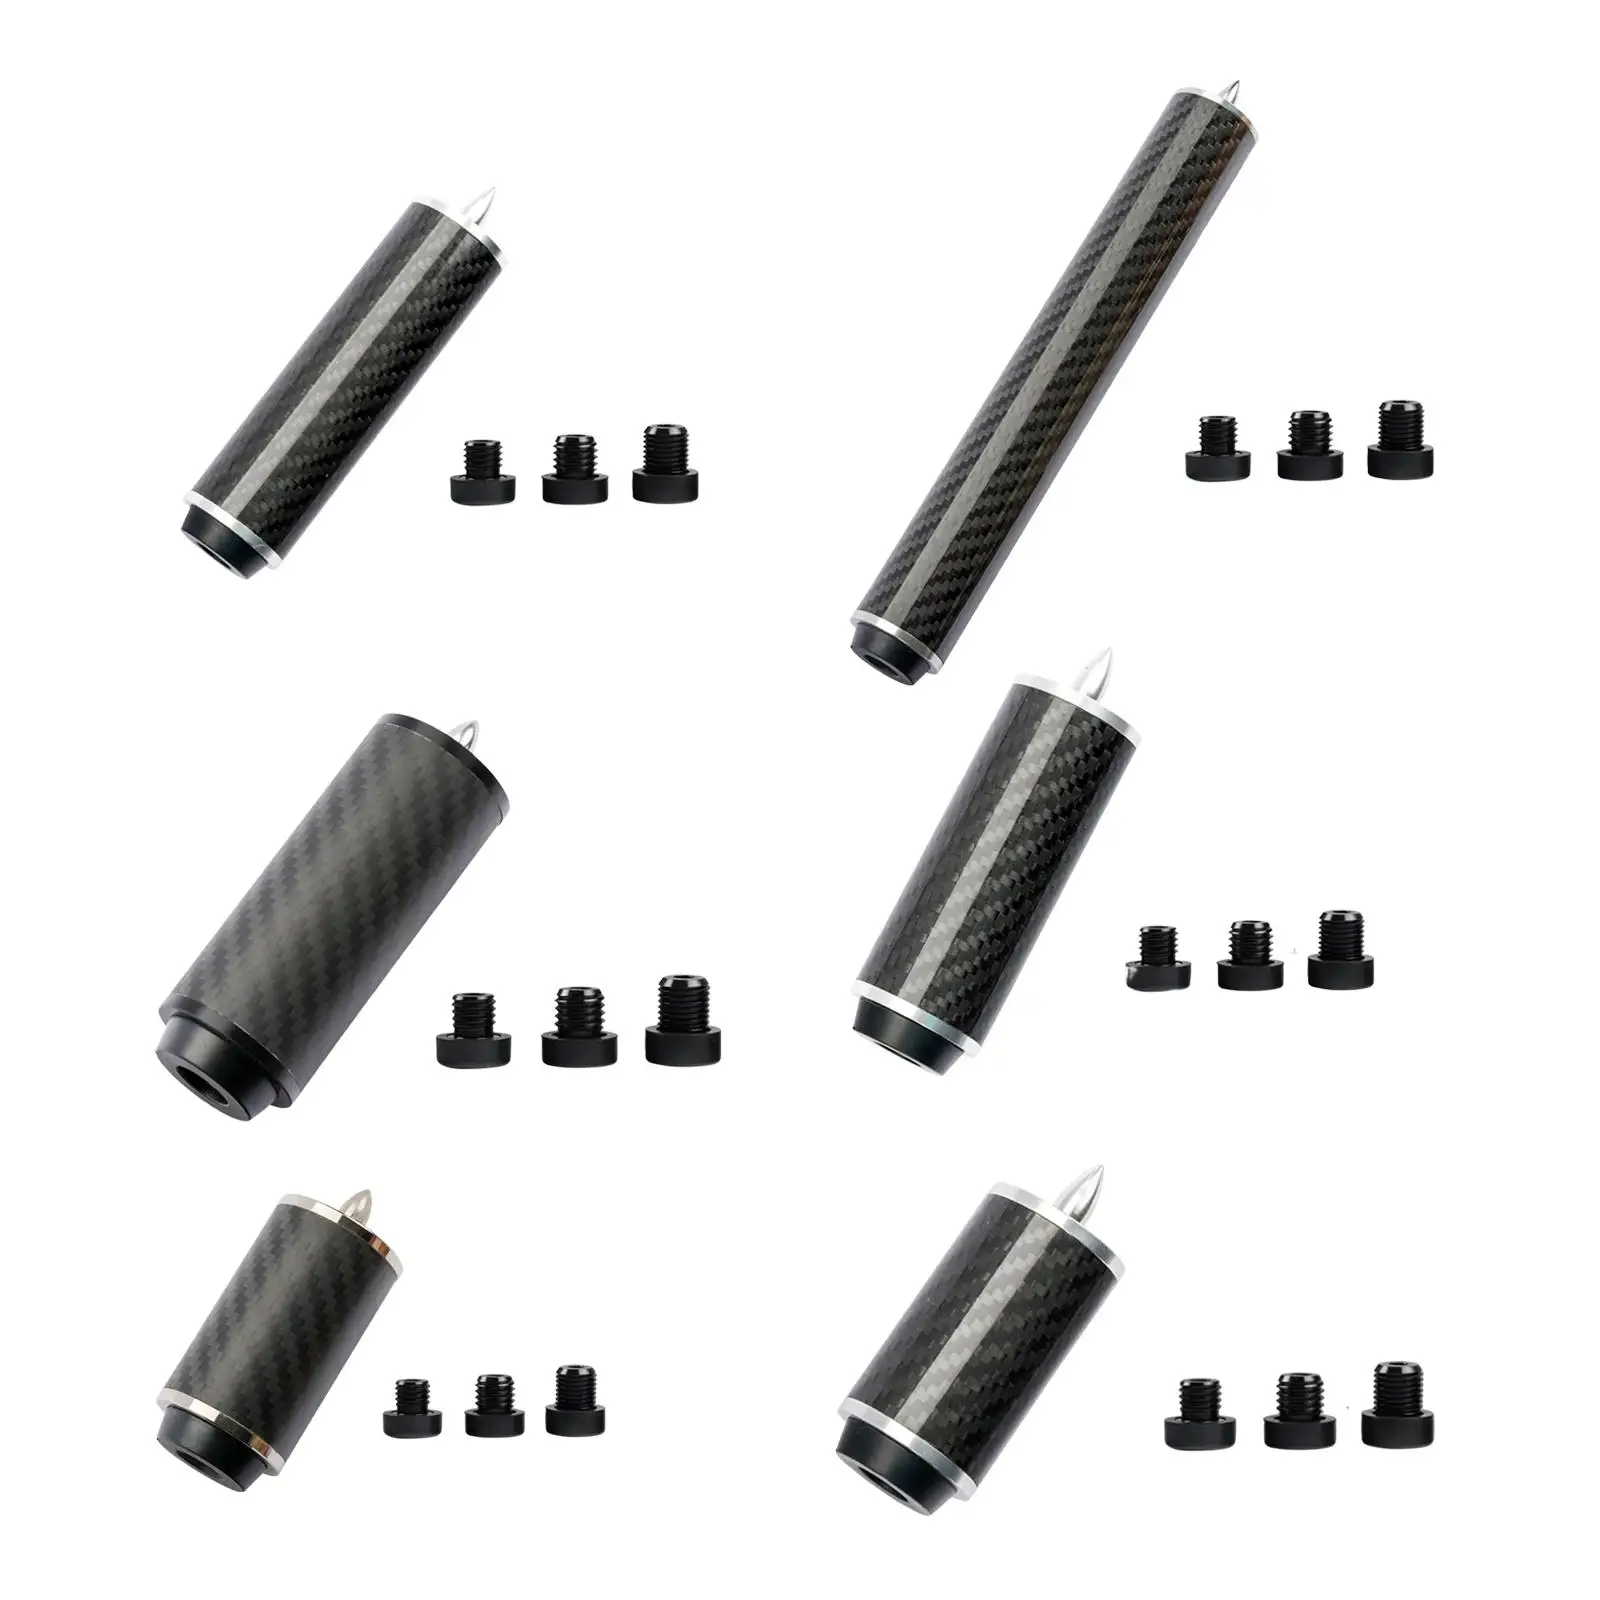 Cue Stick Extender Snooker Weights Replacement Billiards Pool Cue Extension